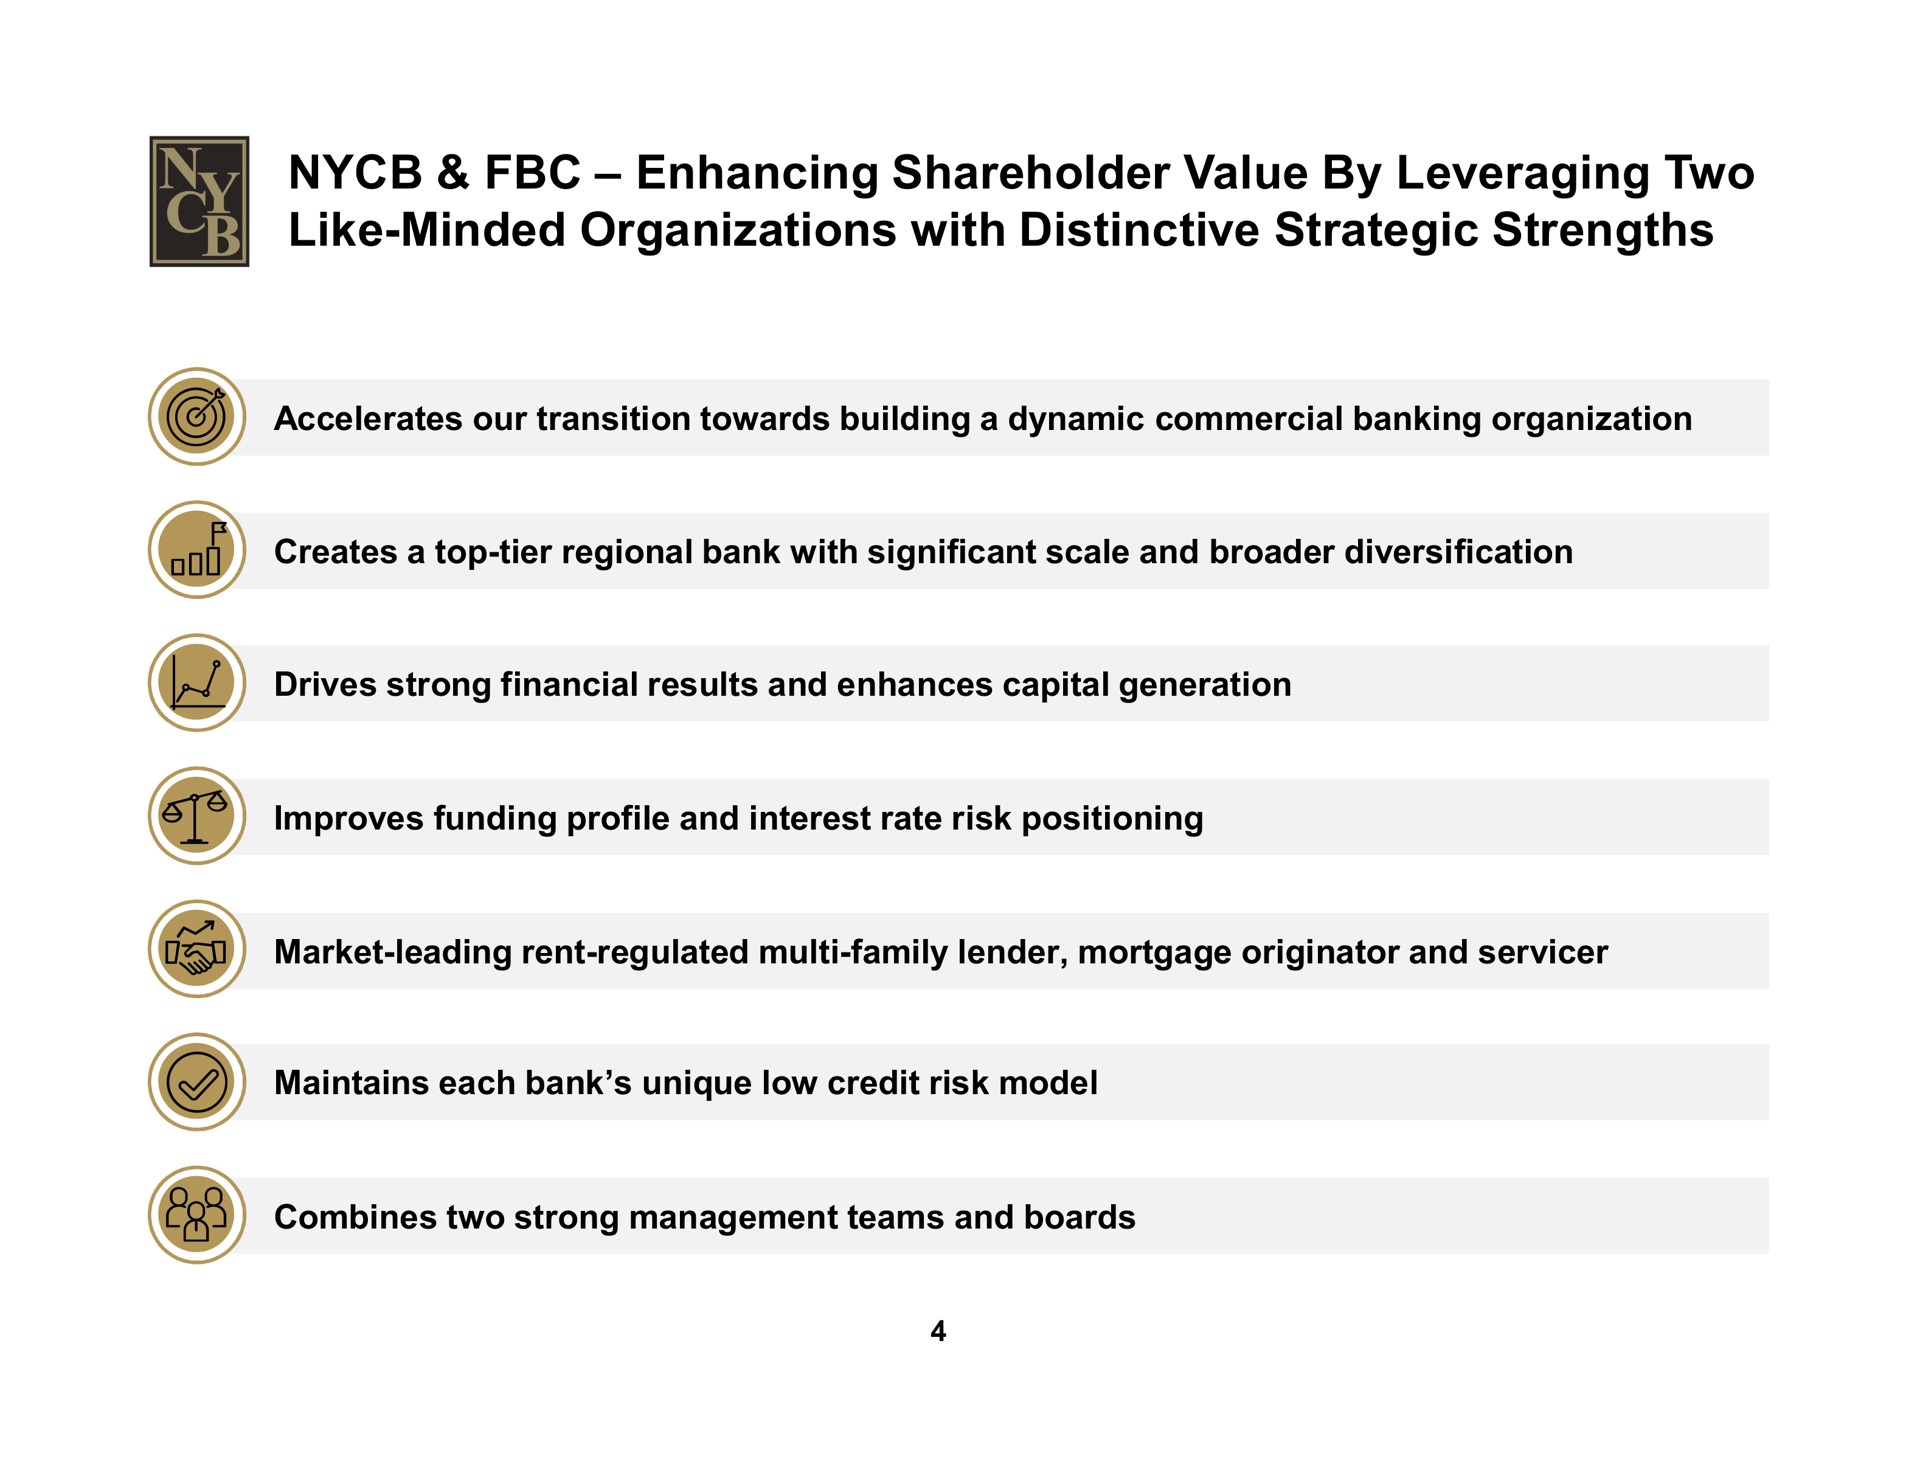 enhancing shareholder value by leveraging two like minded organizations with distinctive strategic strengths | New York Community Bancorp